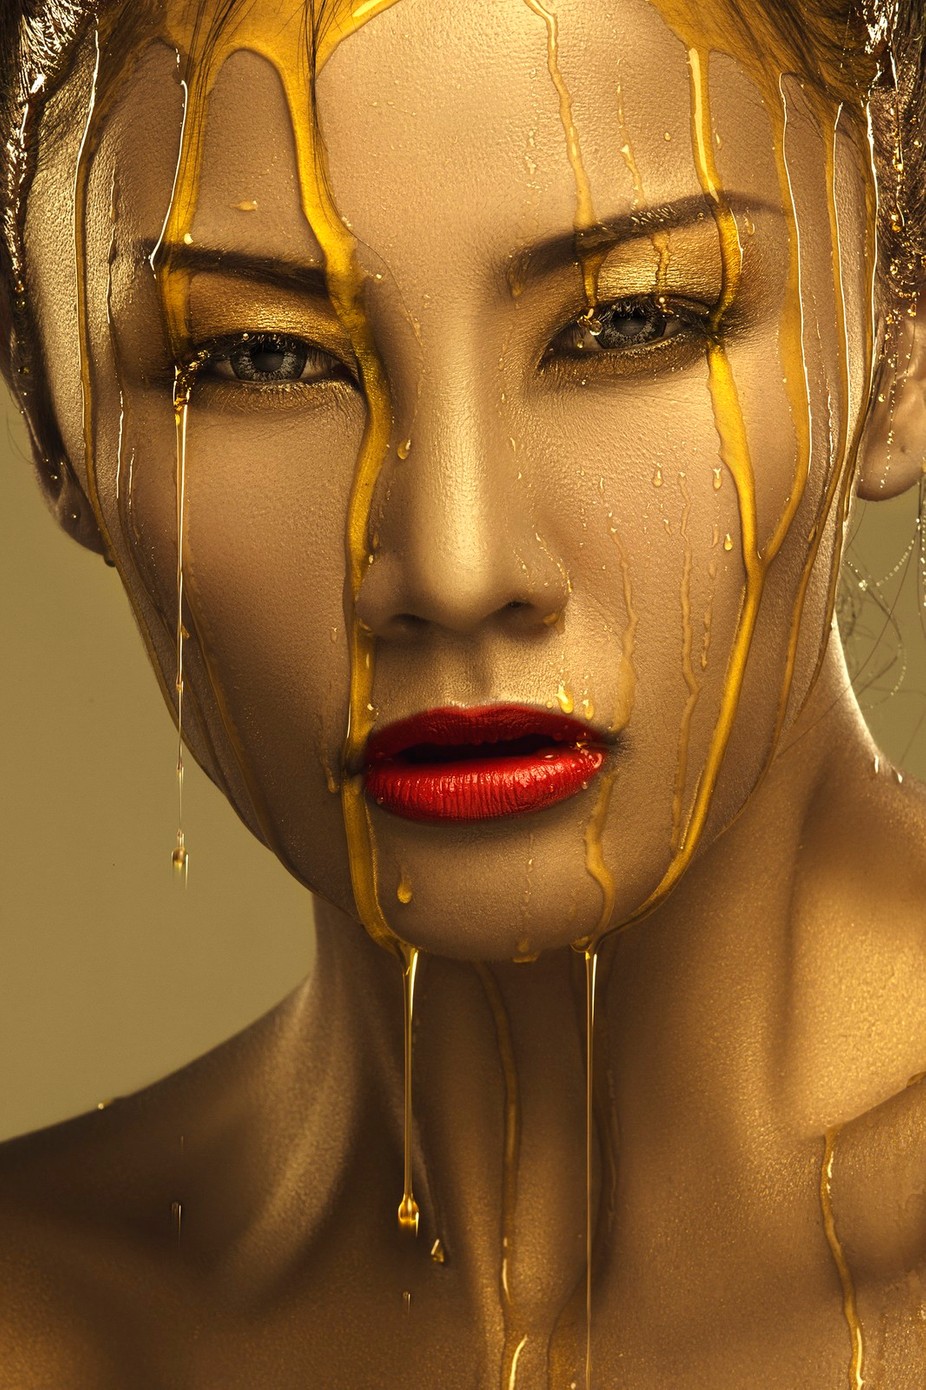 LADY GOLD by oonk_madourart - Female Faces Photo Contest